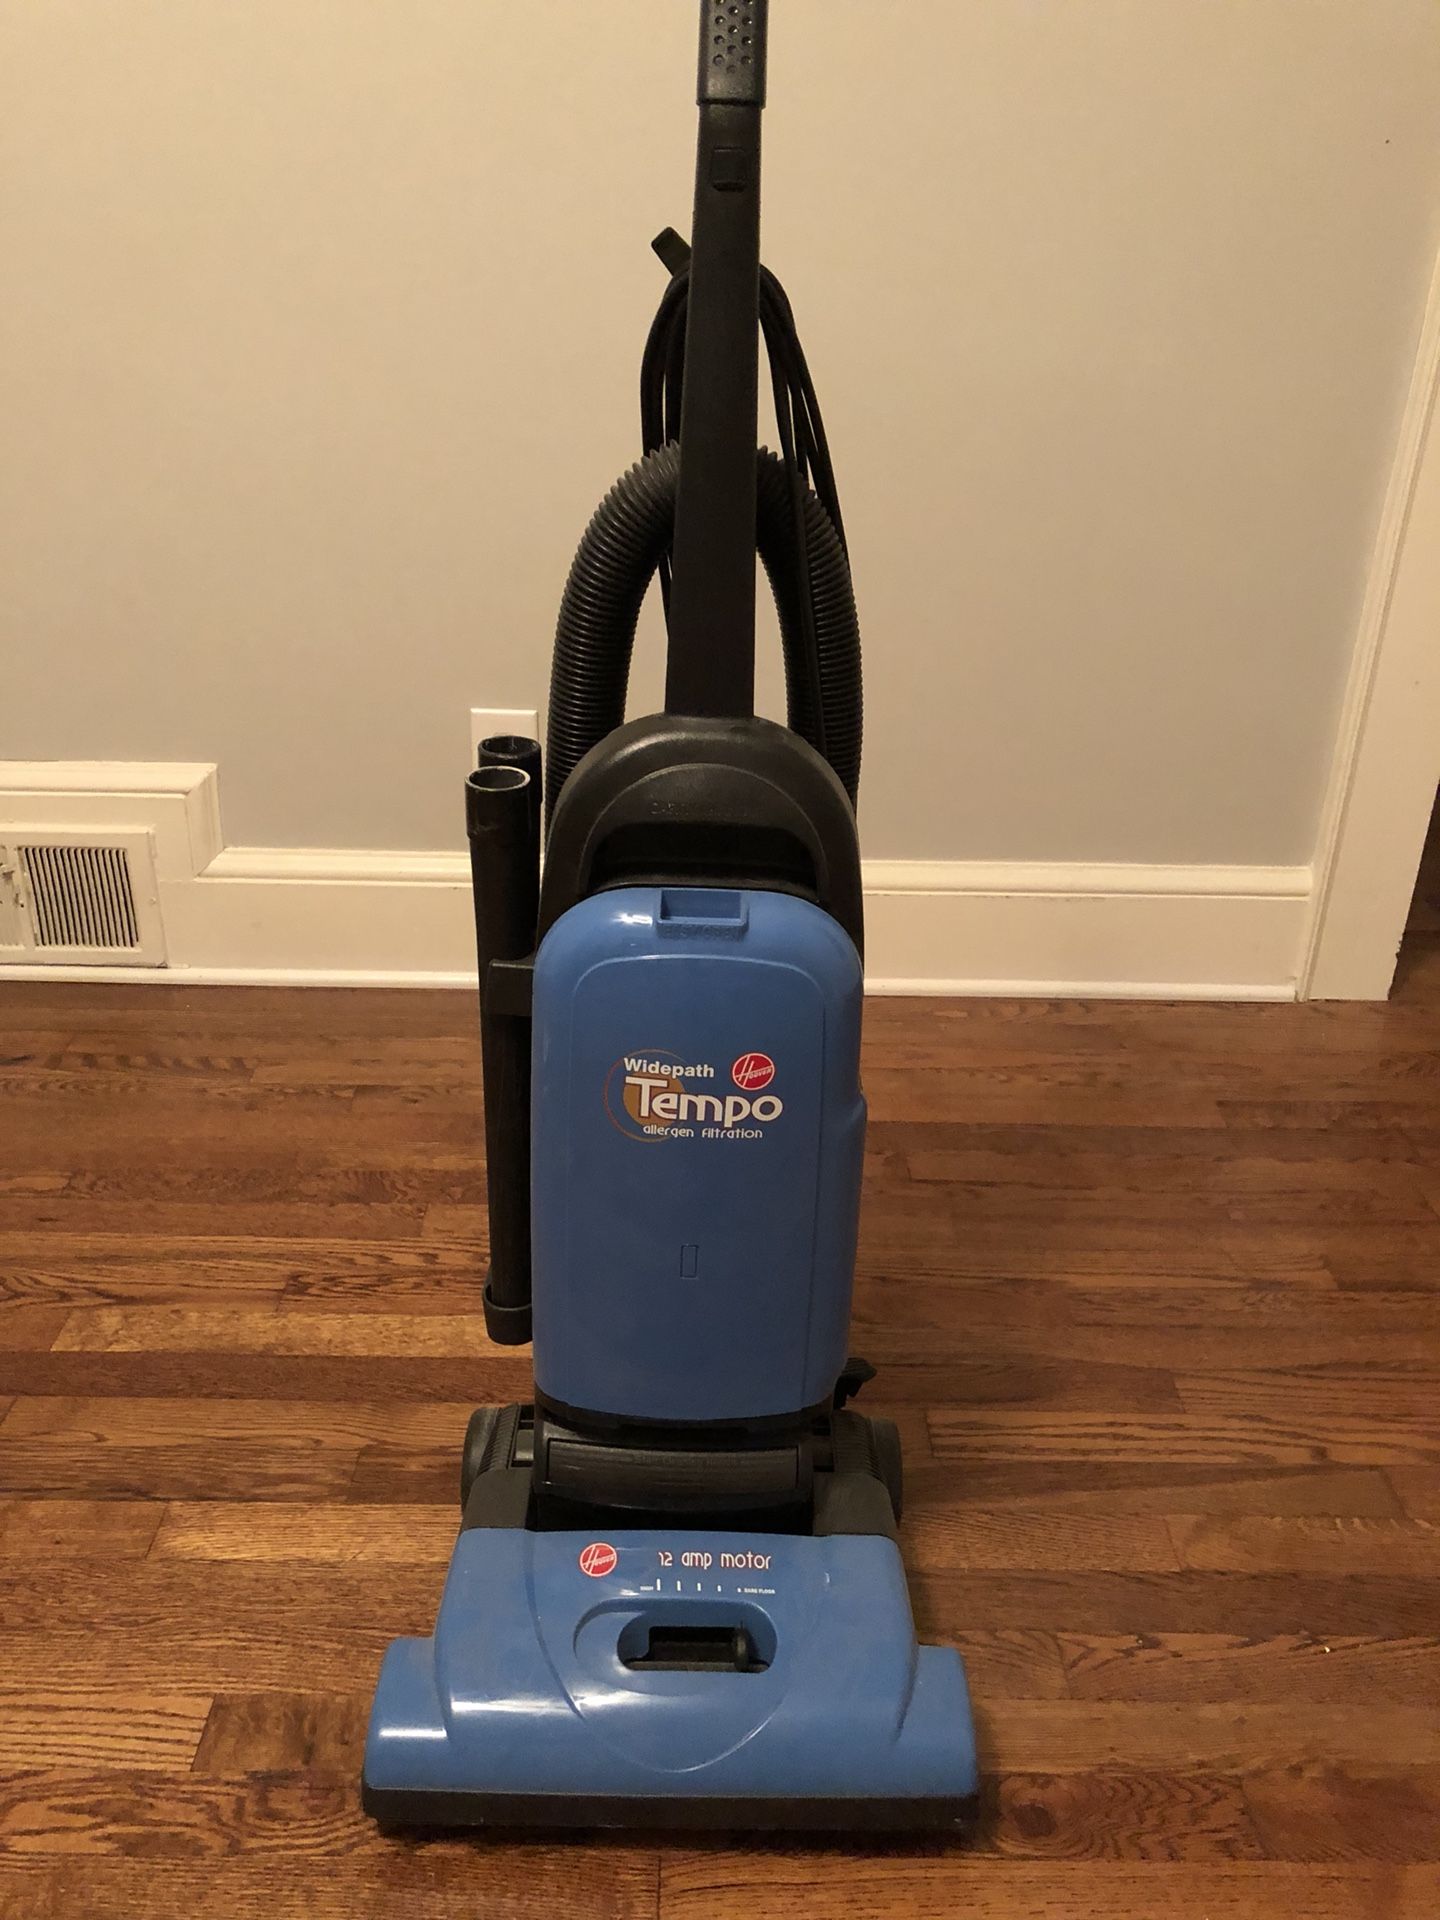 Hoover Widepath Tempo Vacuum w/ extra bags/filters